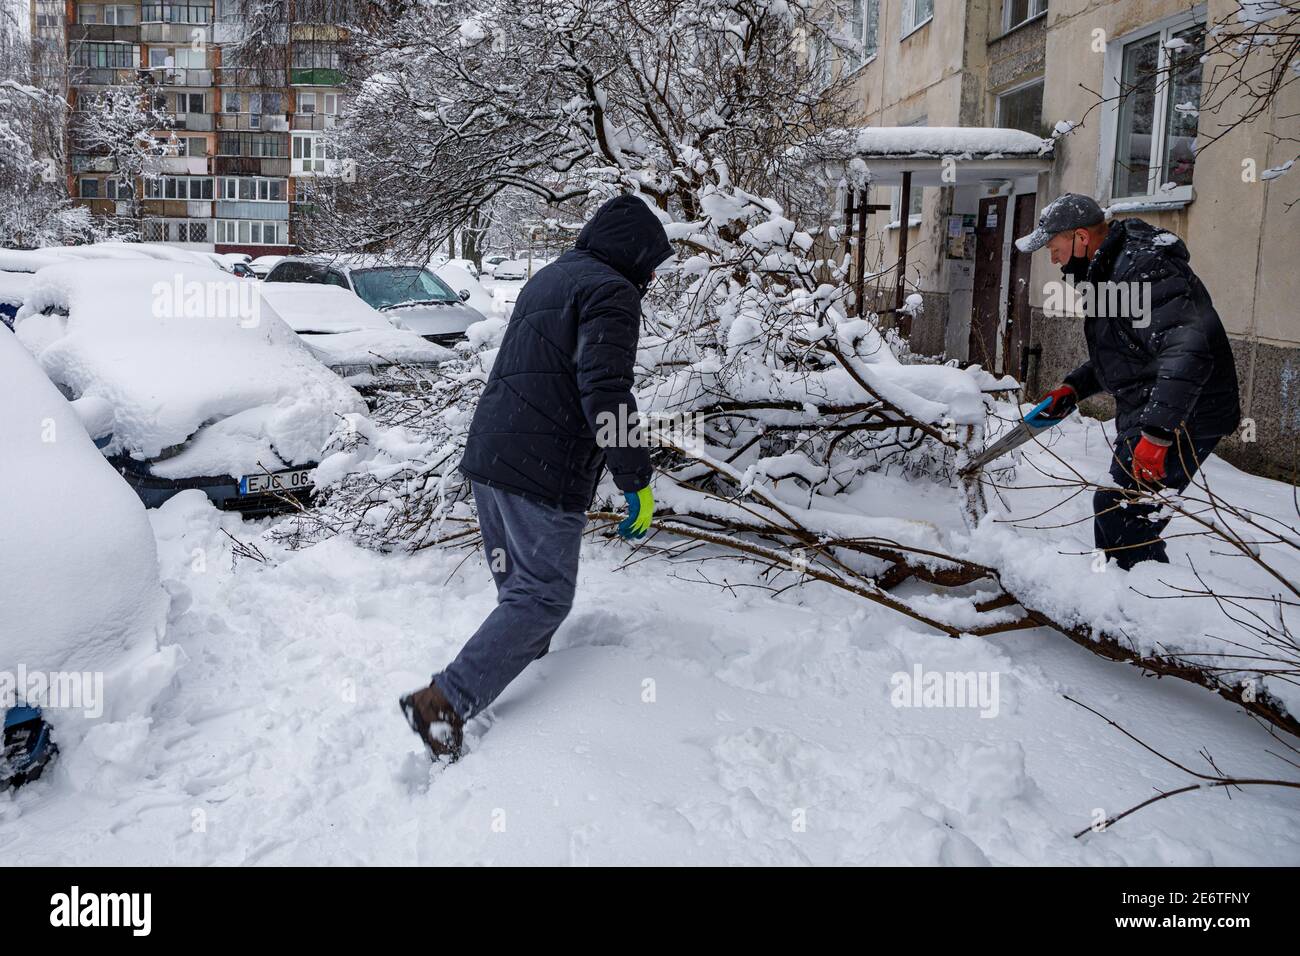 Vilnius, Lithuania, January 28, 2021. A man removes a fallen tree after a snowstorm with a hand saw Stock Photo